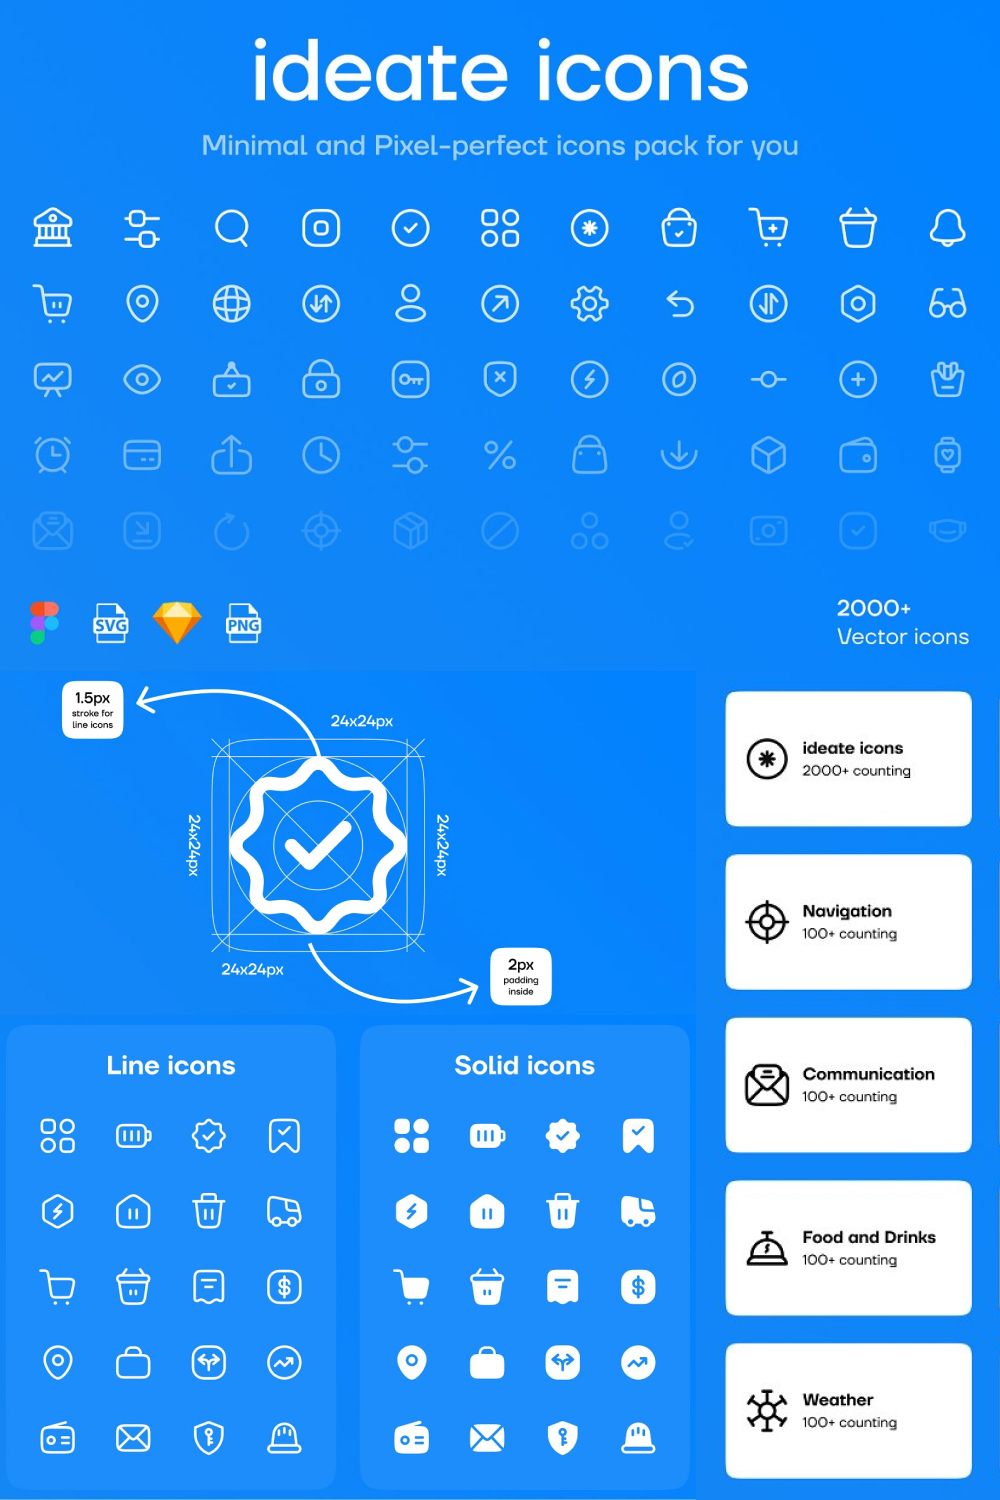 Illustrations ideate icons minimal vector icons of pinterest.